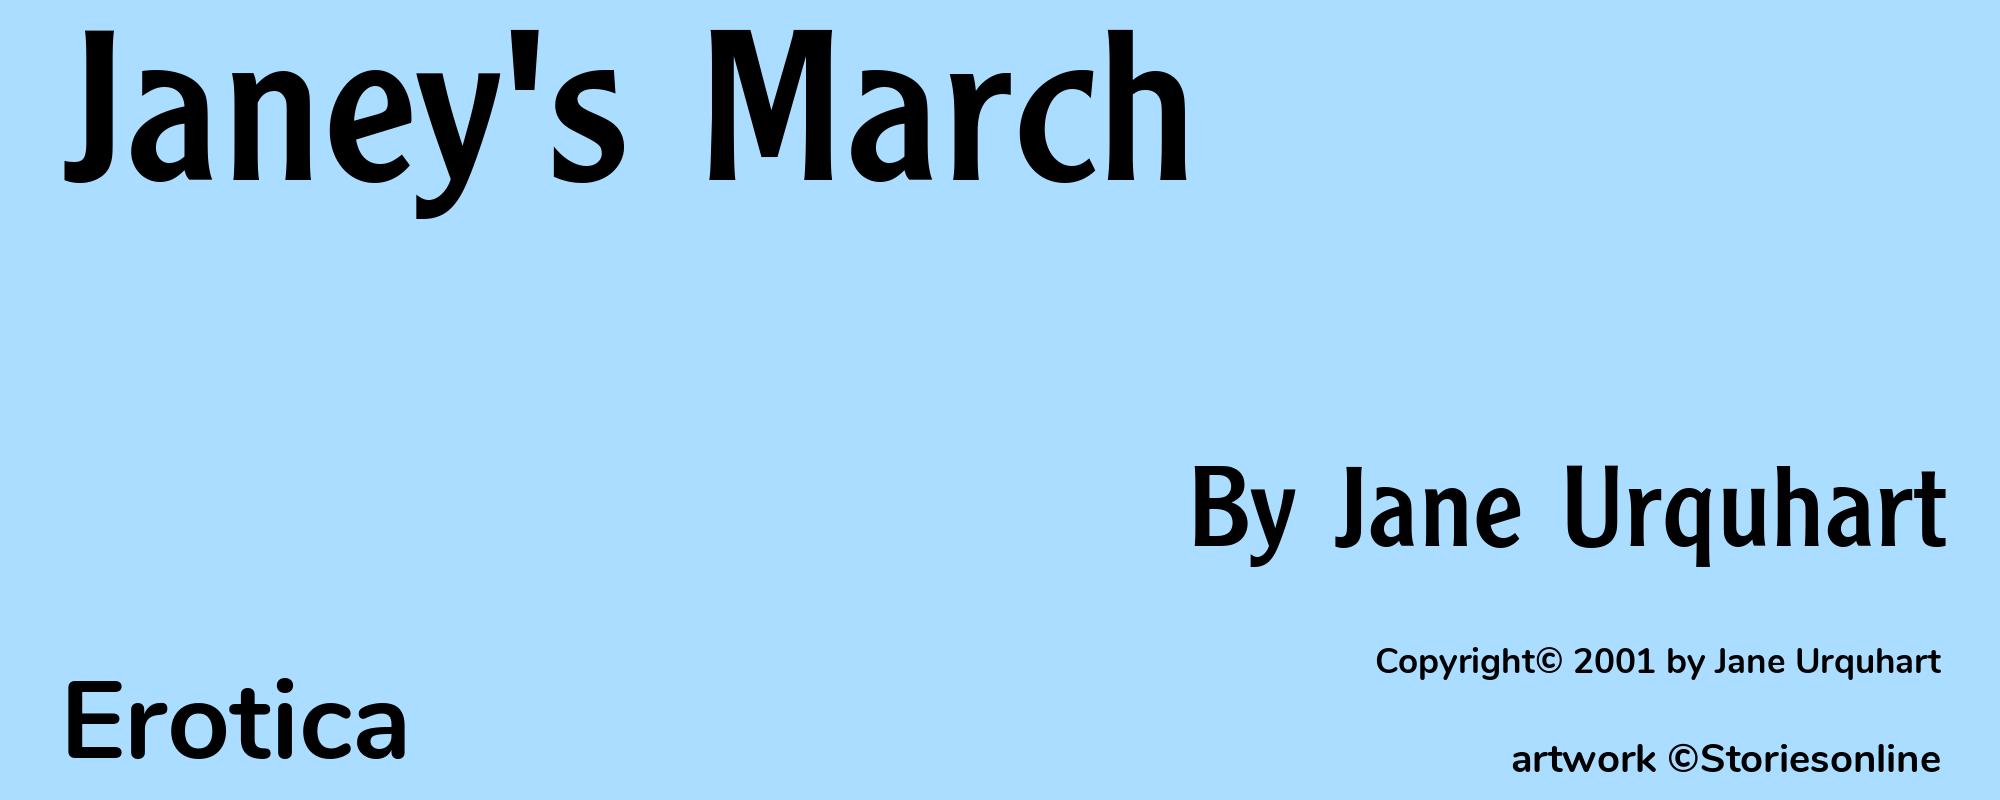 Janey's March - Cover